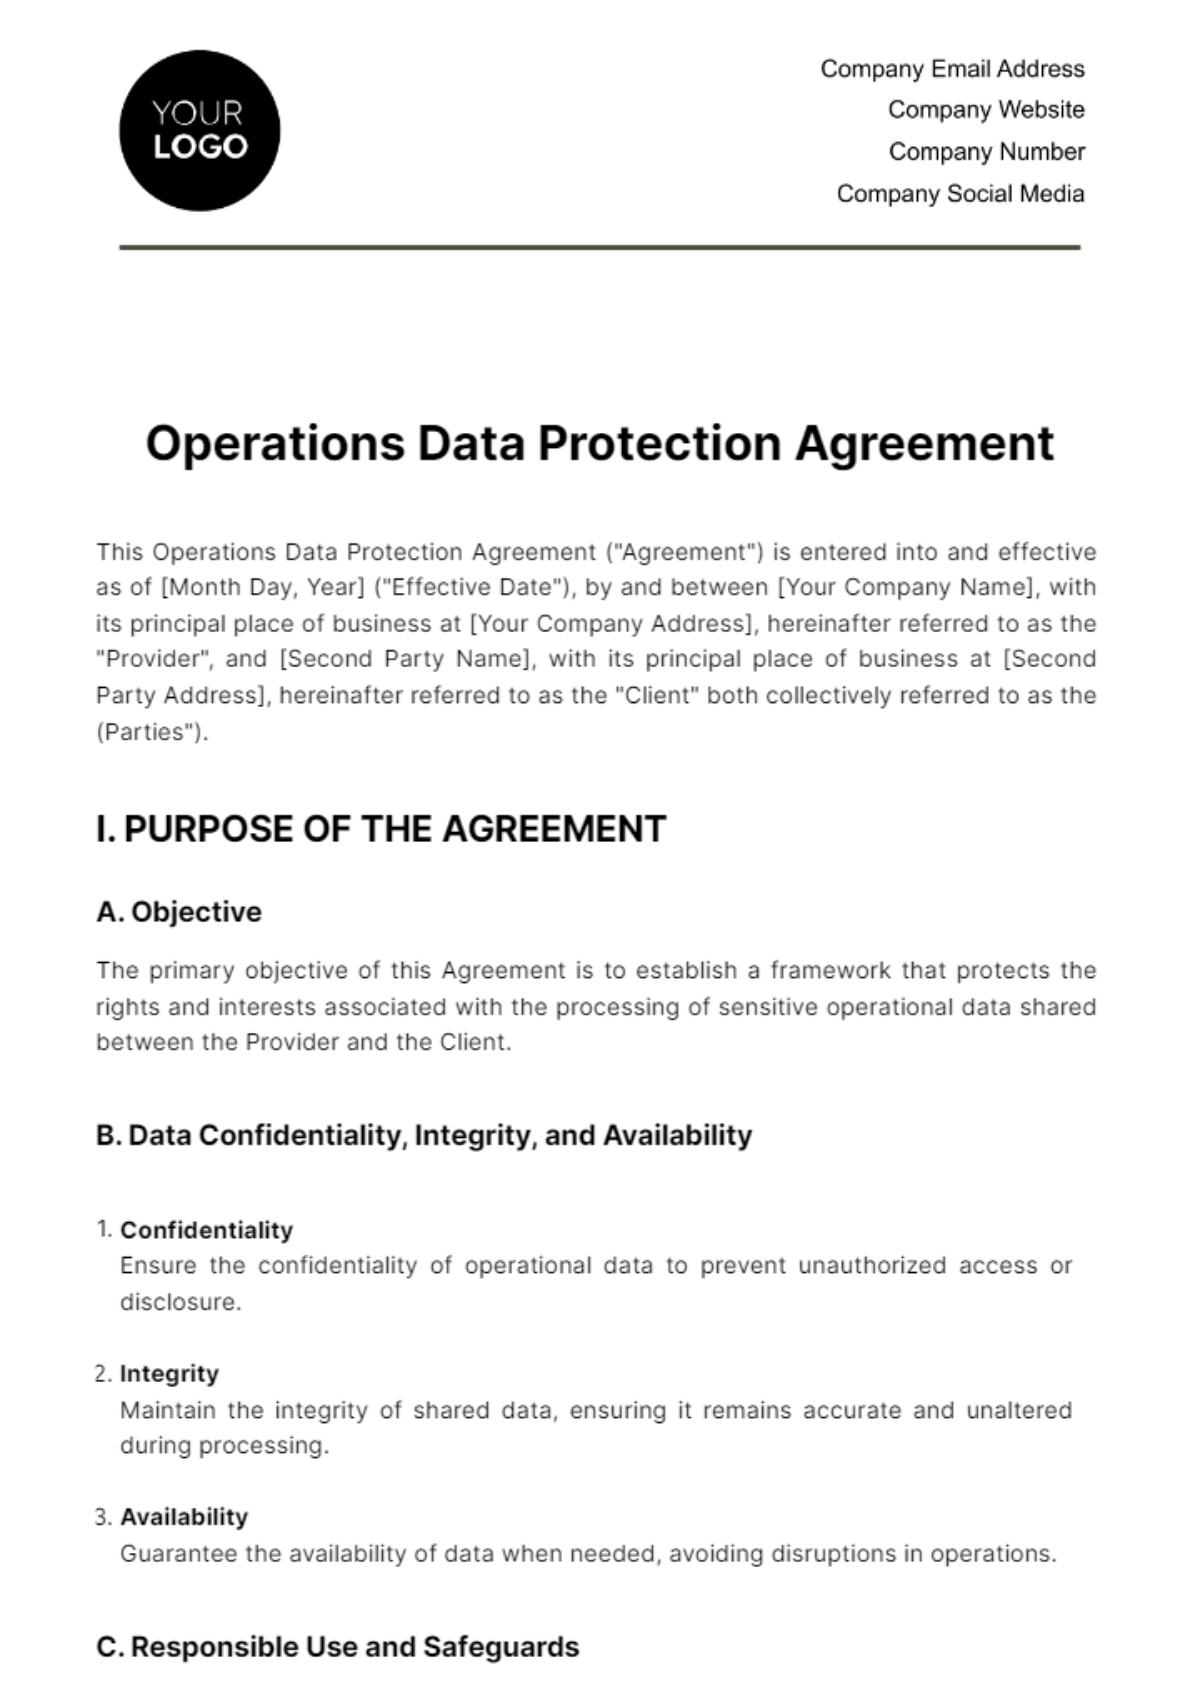 Operations Data Protection Agreement Template